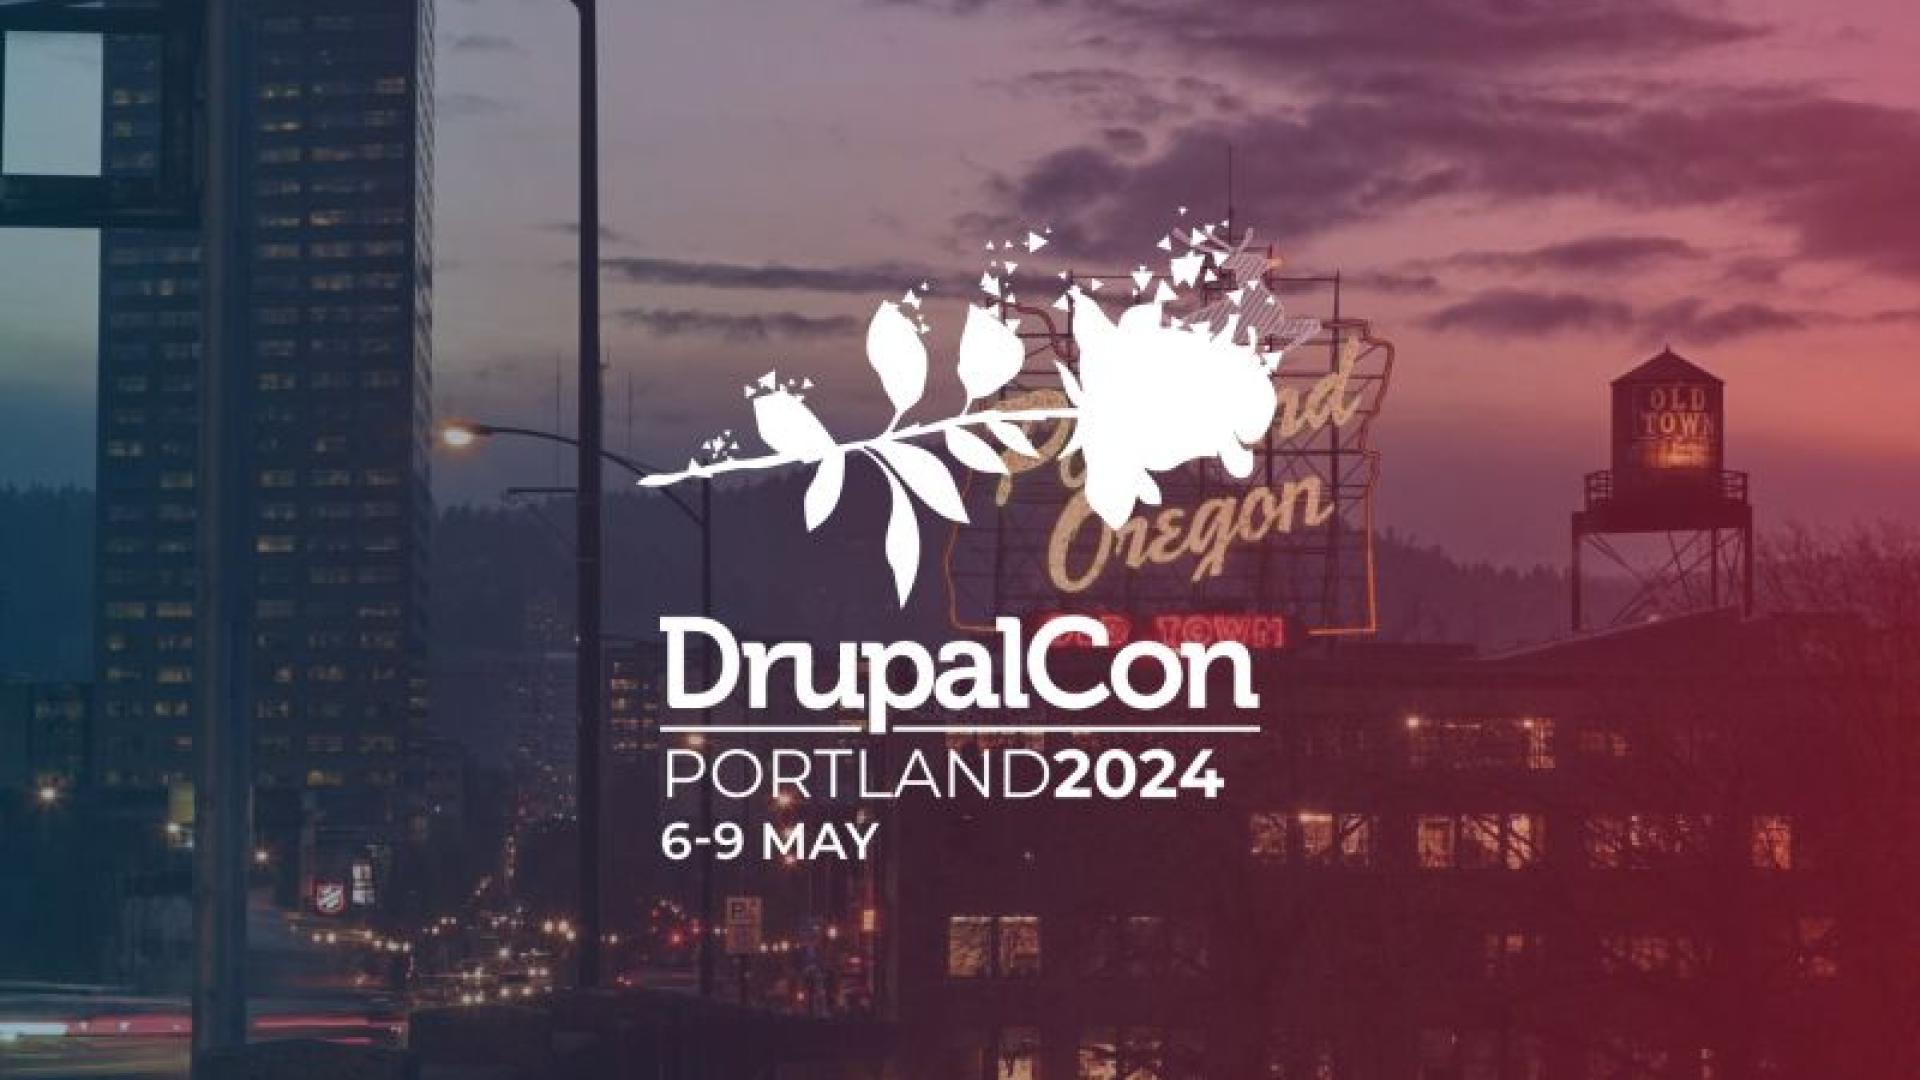 DrupalCon Portland 2024 Highlights MustAttend Sessions and Networking